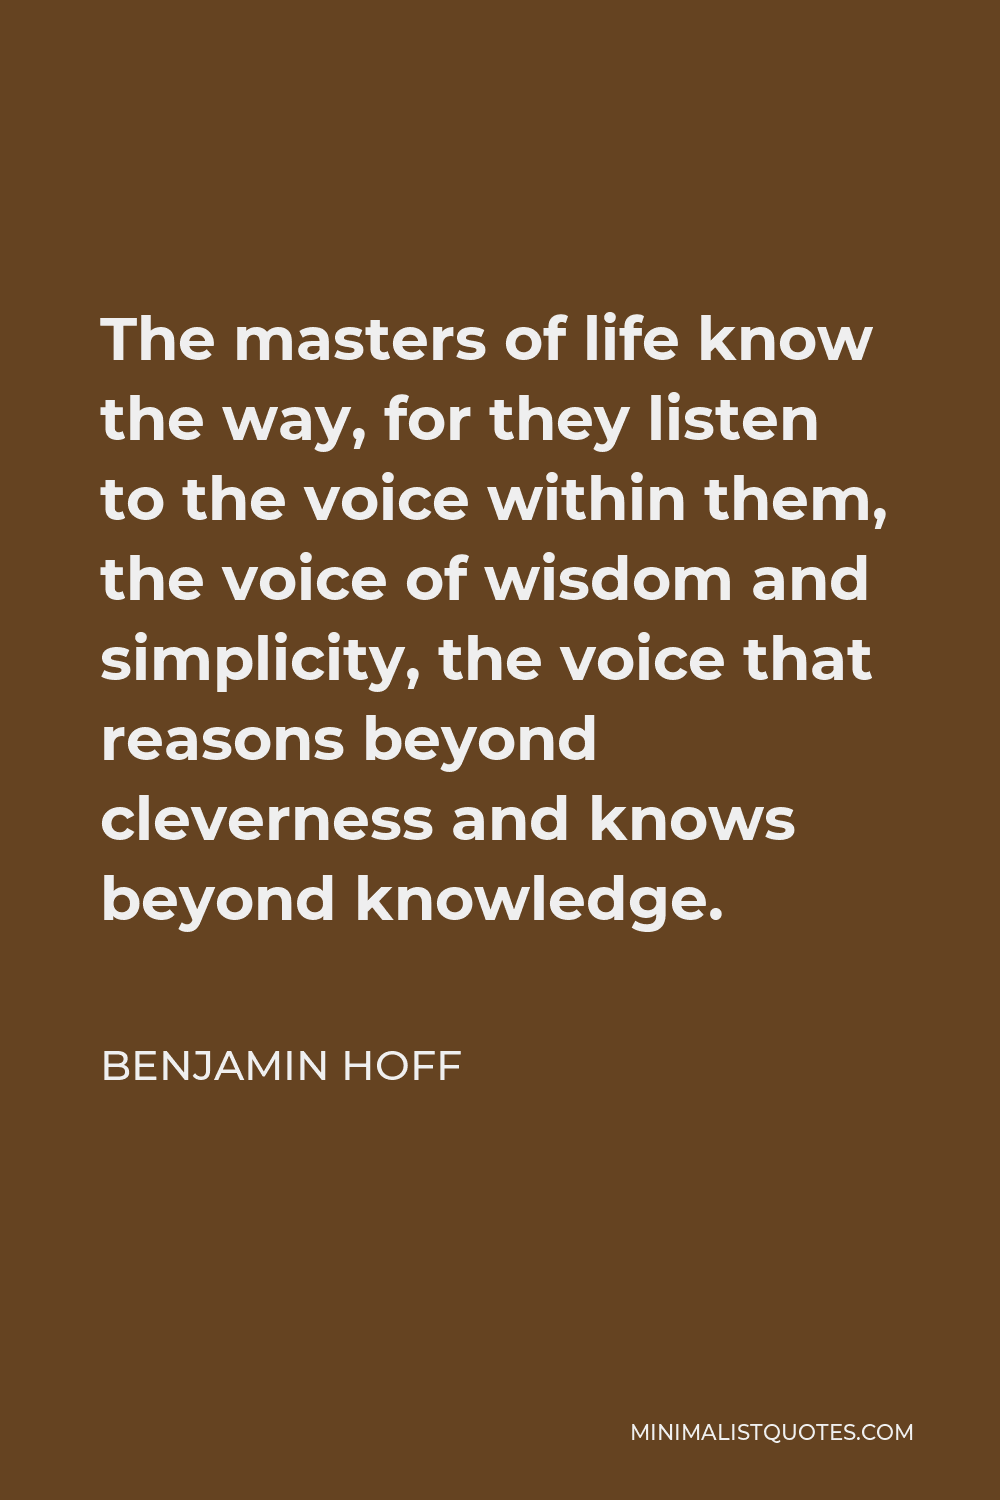 Benjamin Hoff Quote - The masters of life know the way, for they listen to the voice within them, the voice of wisdom and simplicity, the voice that reasons beyond cleverness and knows beyond knowledge.